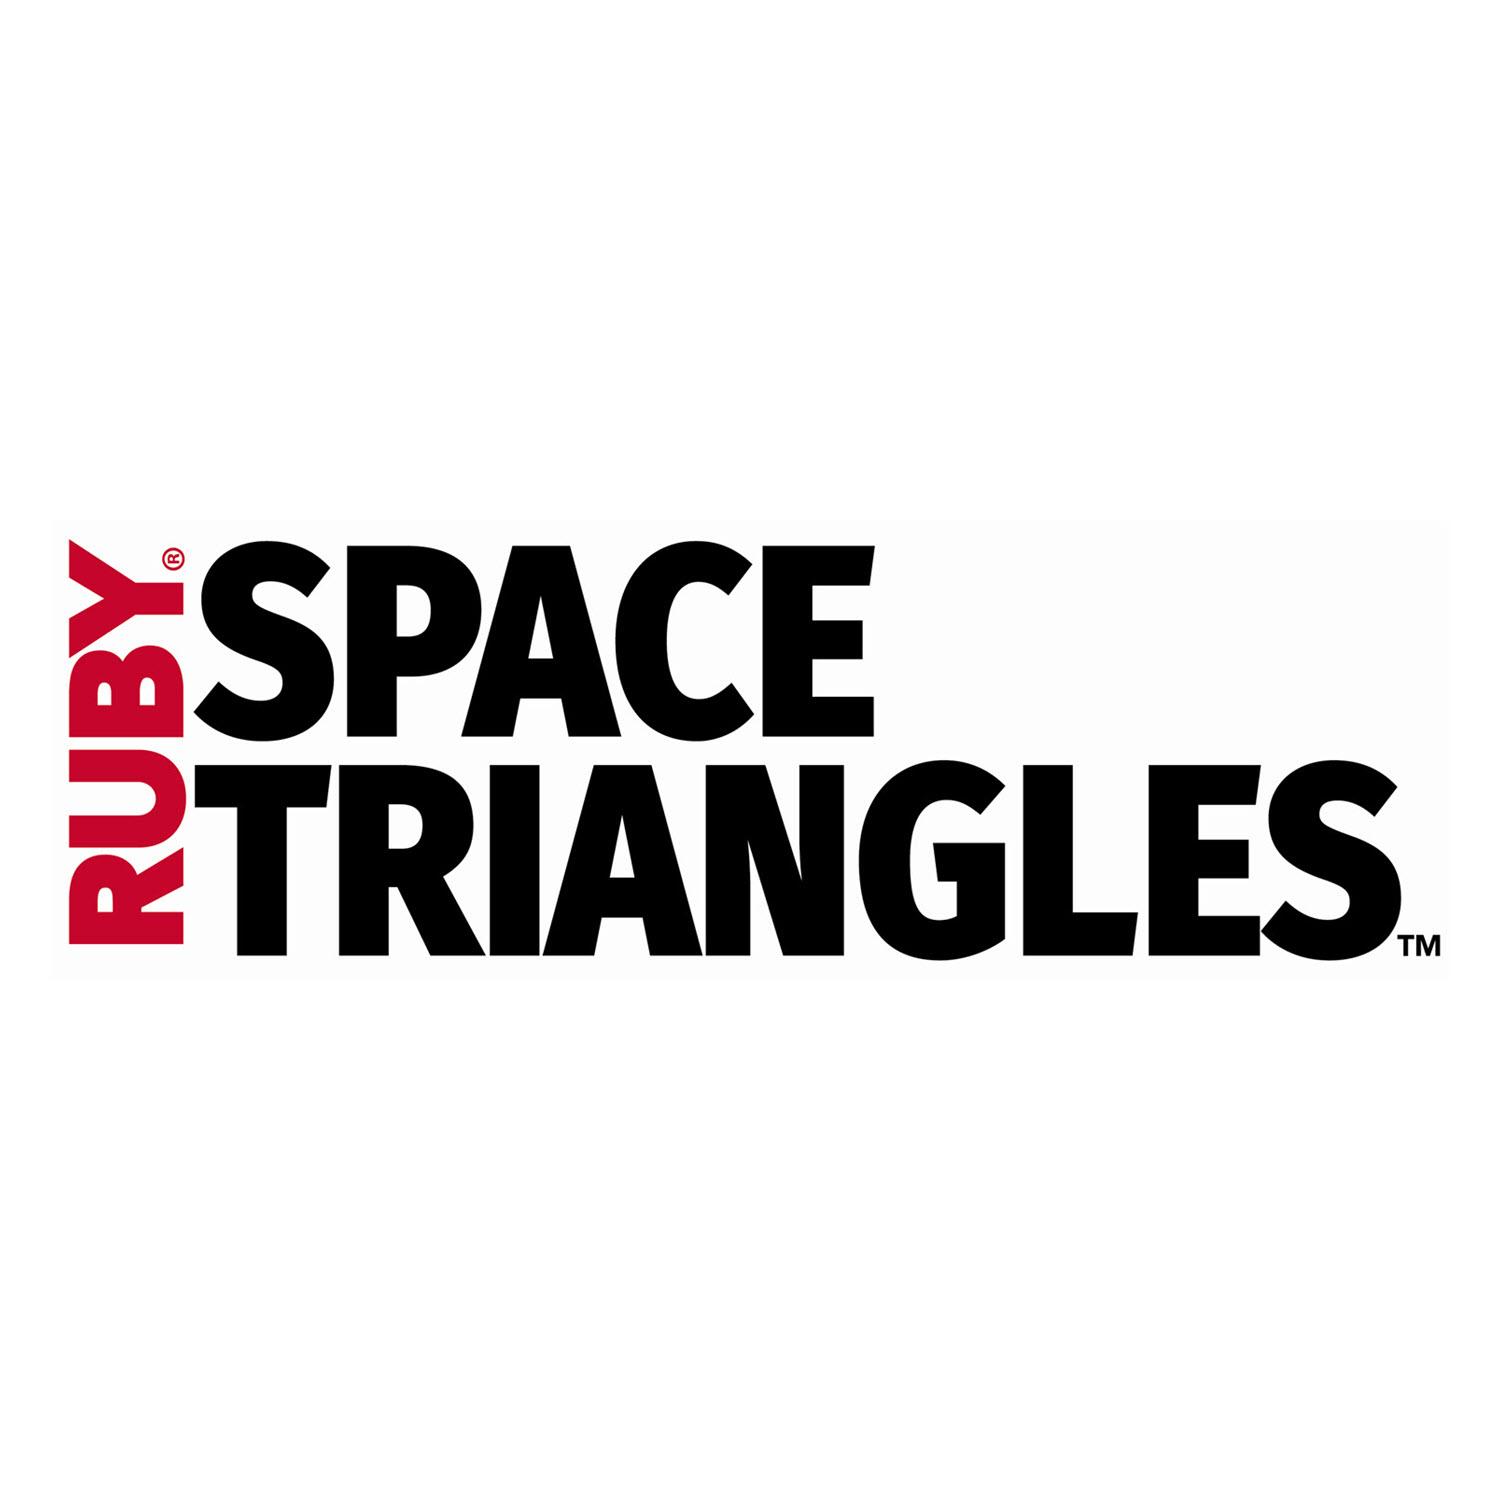 Ruby Space Triangles Reviews - Too Good to be True?